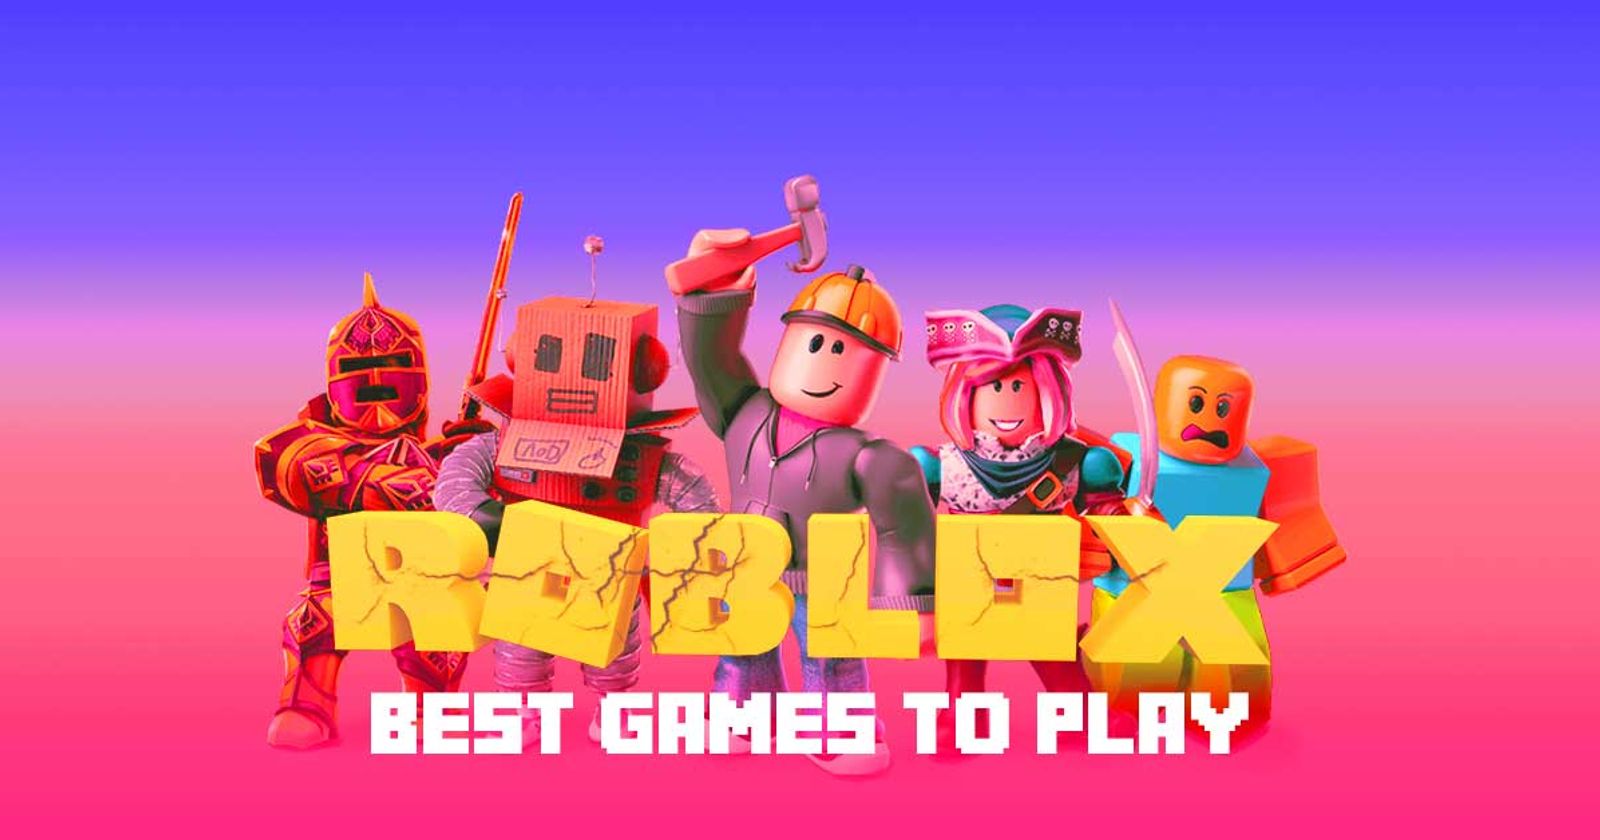 Best Roblox Multiplayer Games to Play with Your Friends-Game Guides-LDPlayer